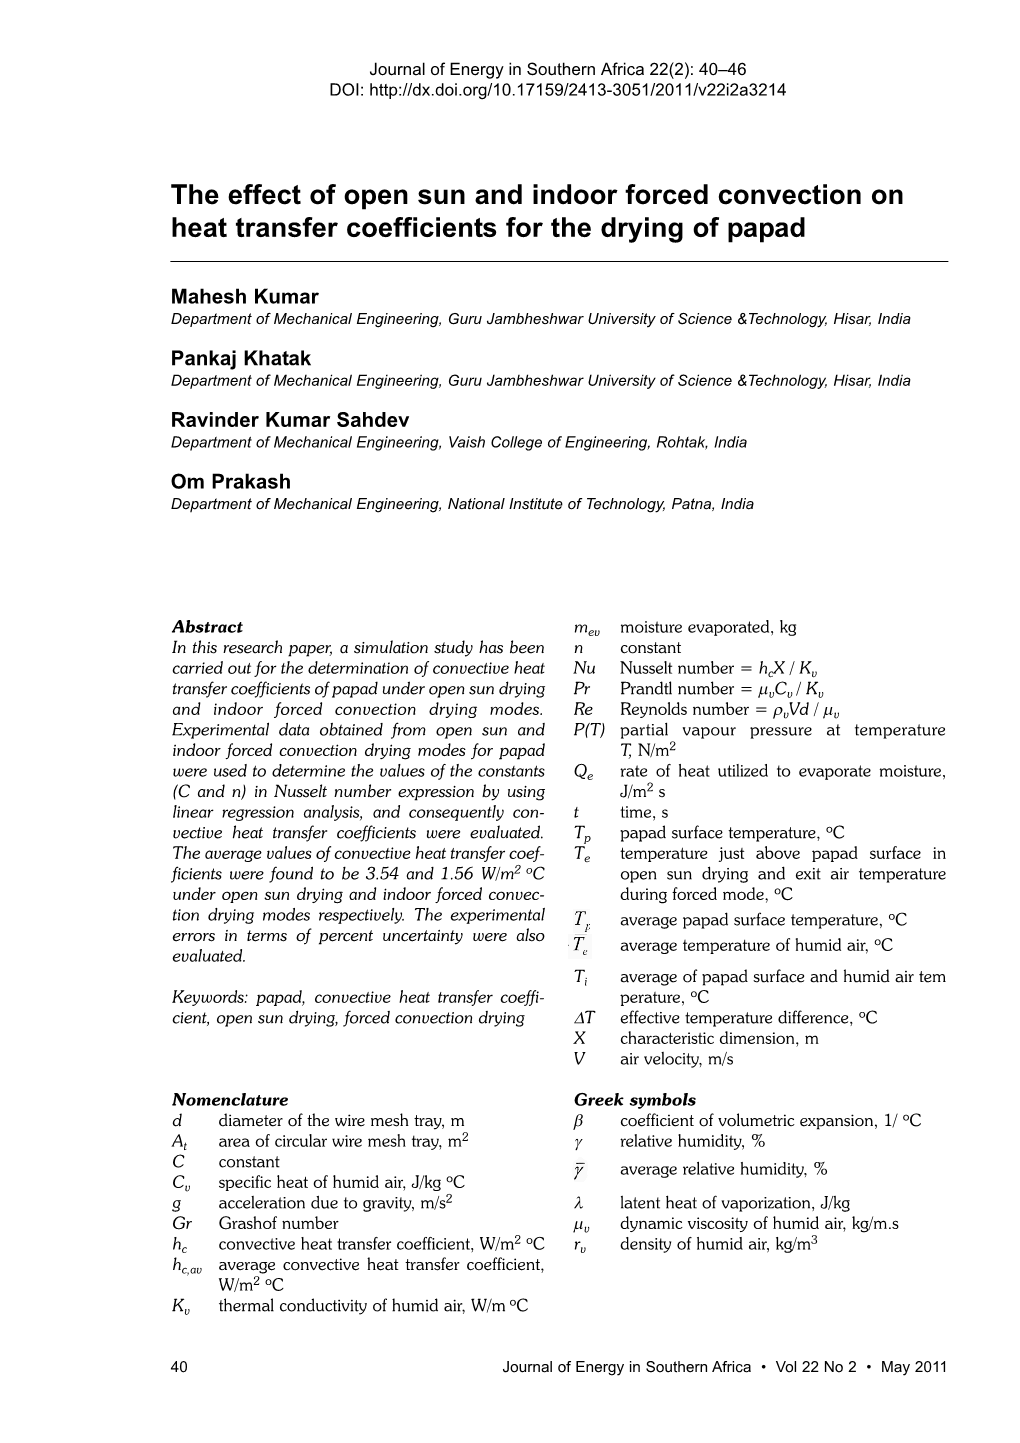 The Effect of Open Sun and Indoor Forced Convection on Heat Transfer Coefficients for the Drying of Papad